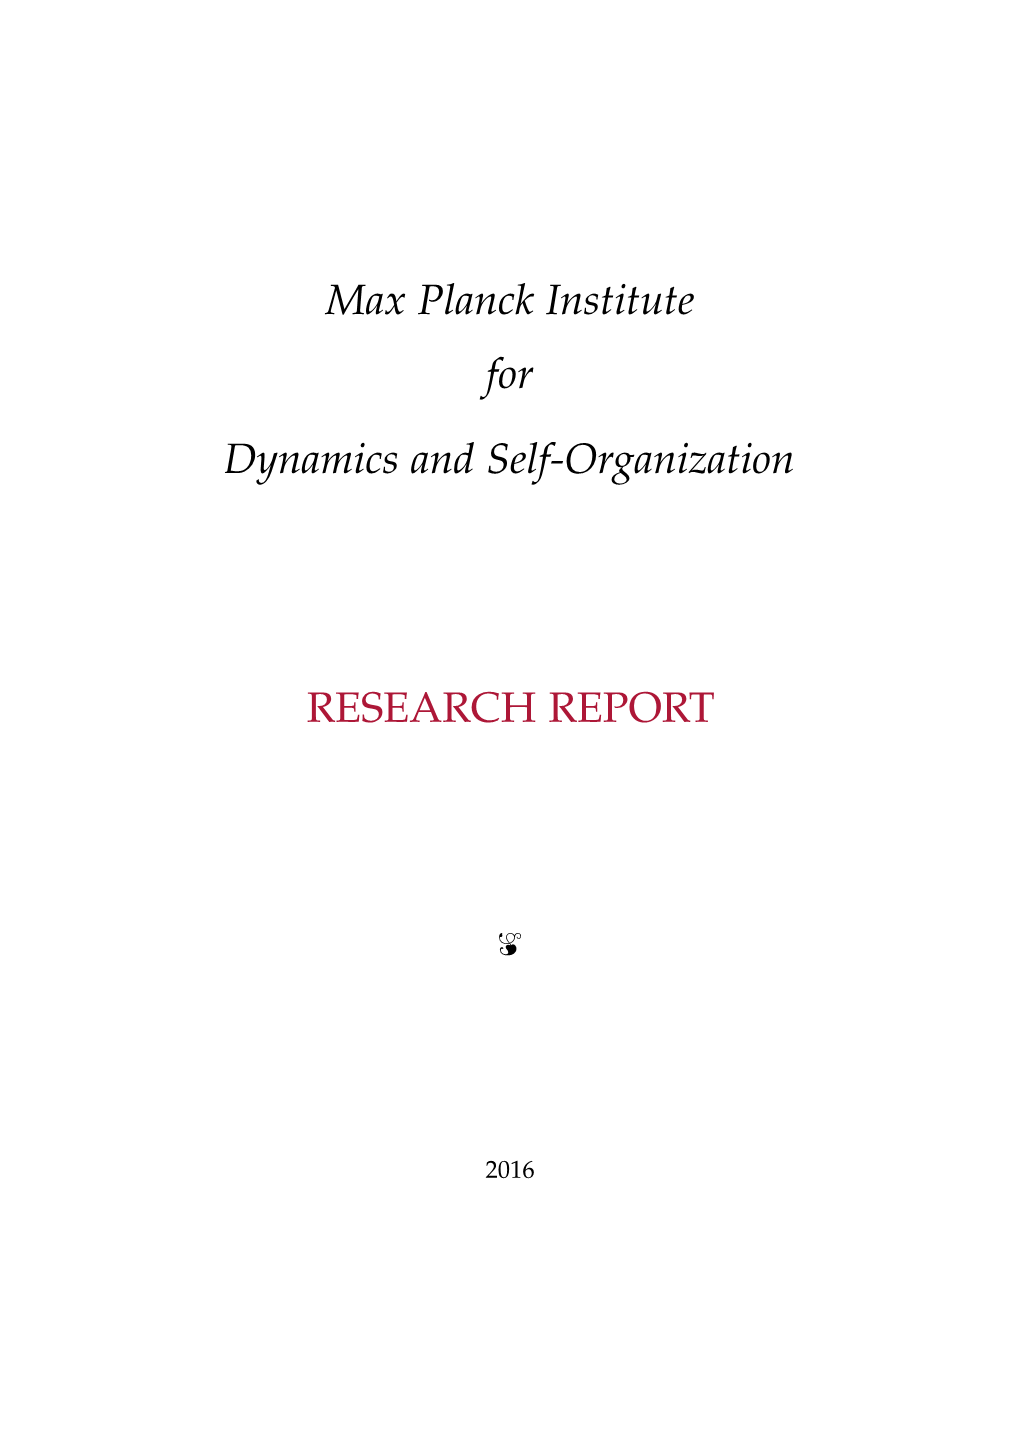 Max Planck Institute for Dynamics and Self-Organization RESEARCH